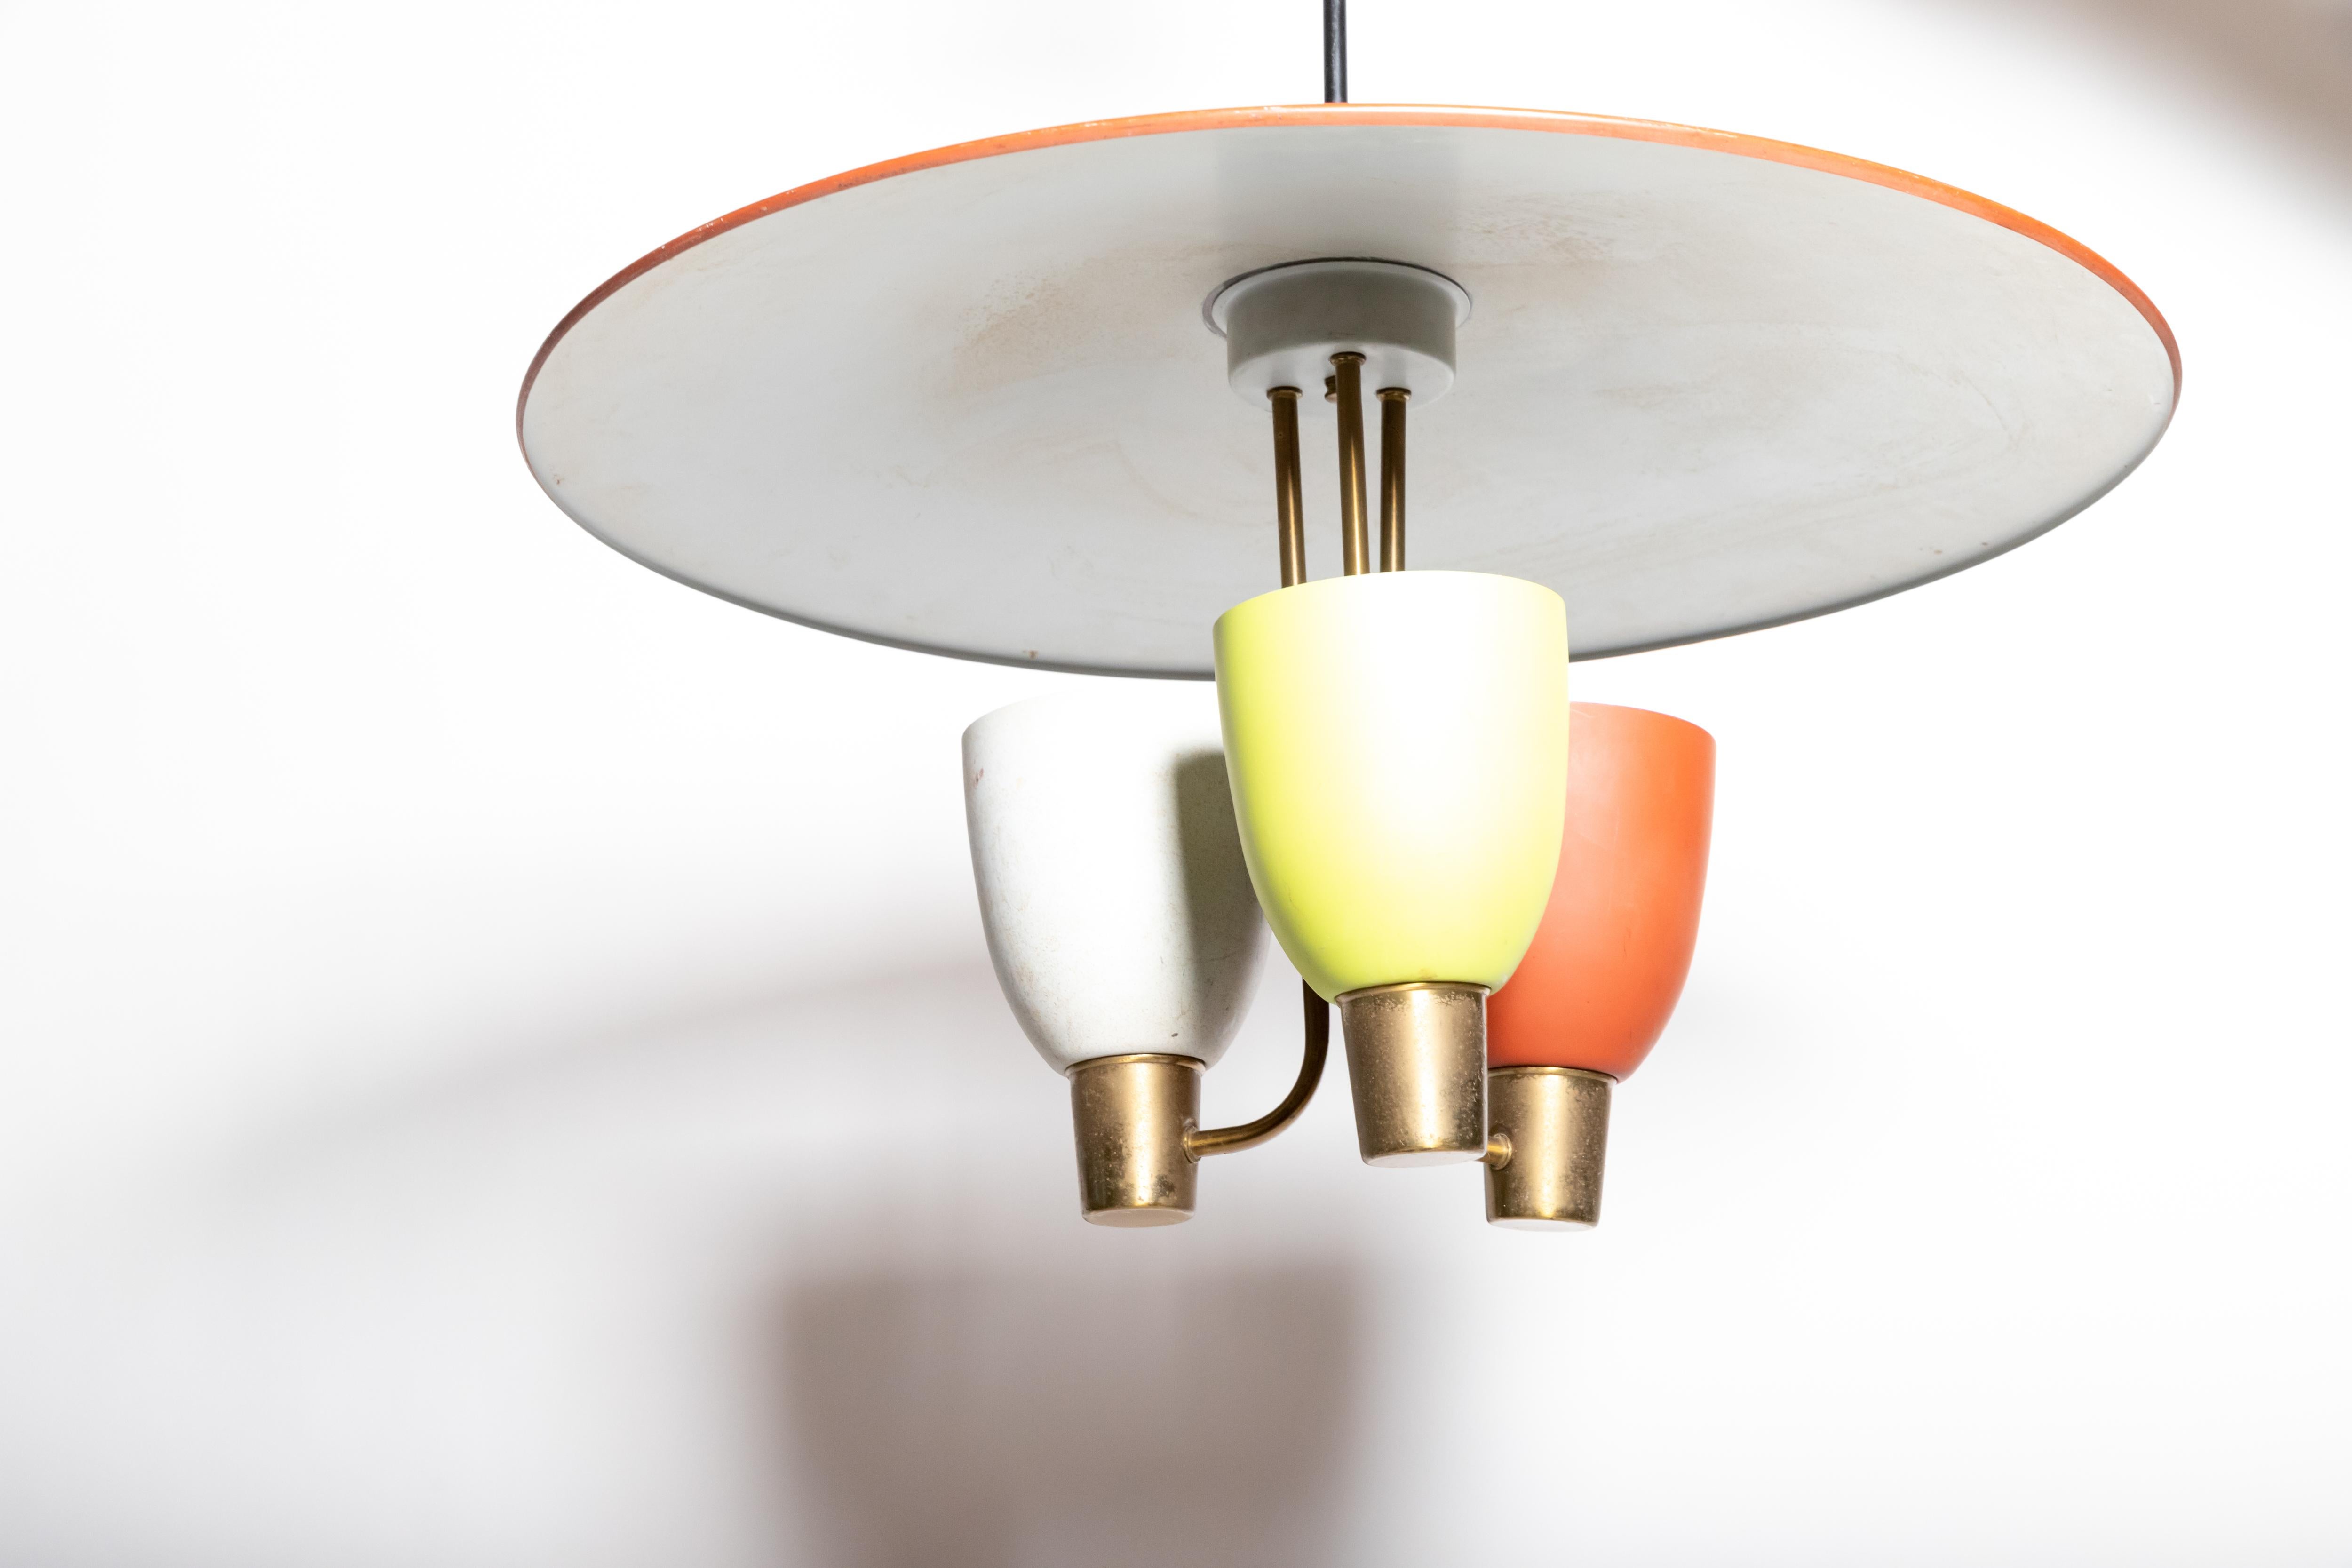 Mid-Century Modern Tricolor Ceiling Fixture with Three Lights, c. 1950s